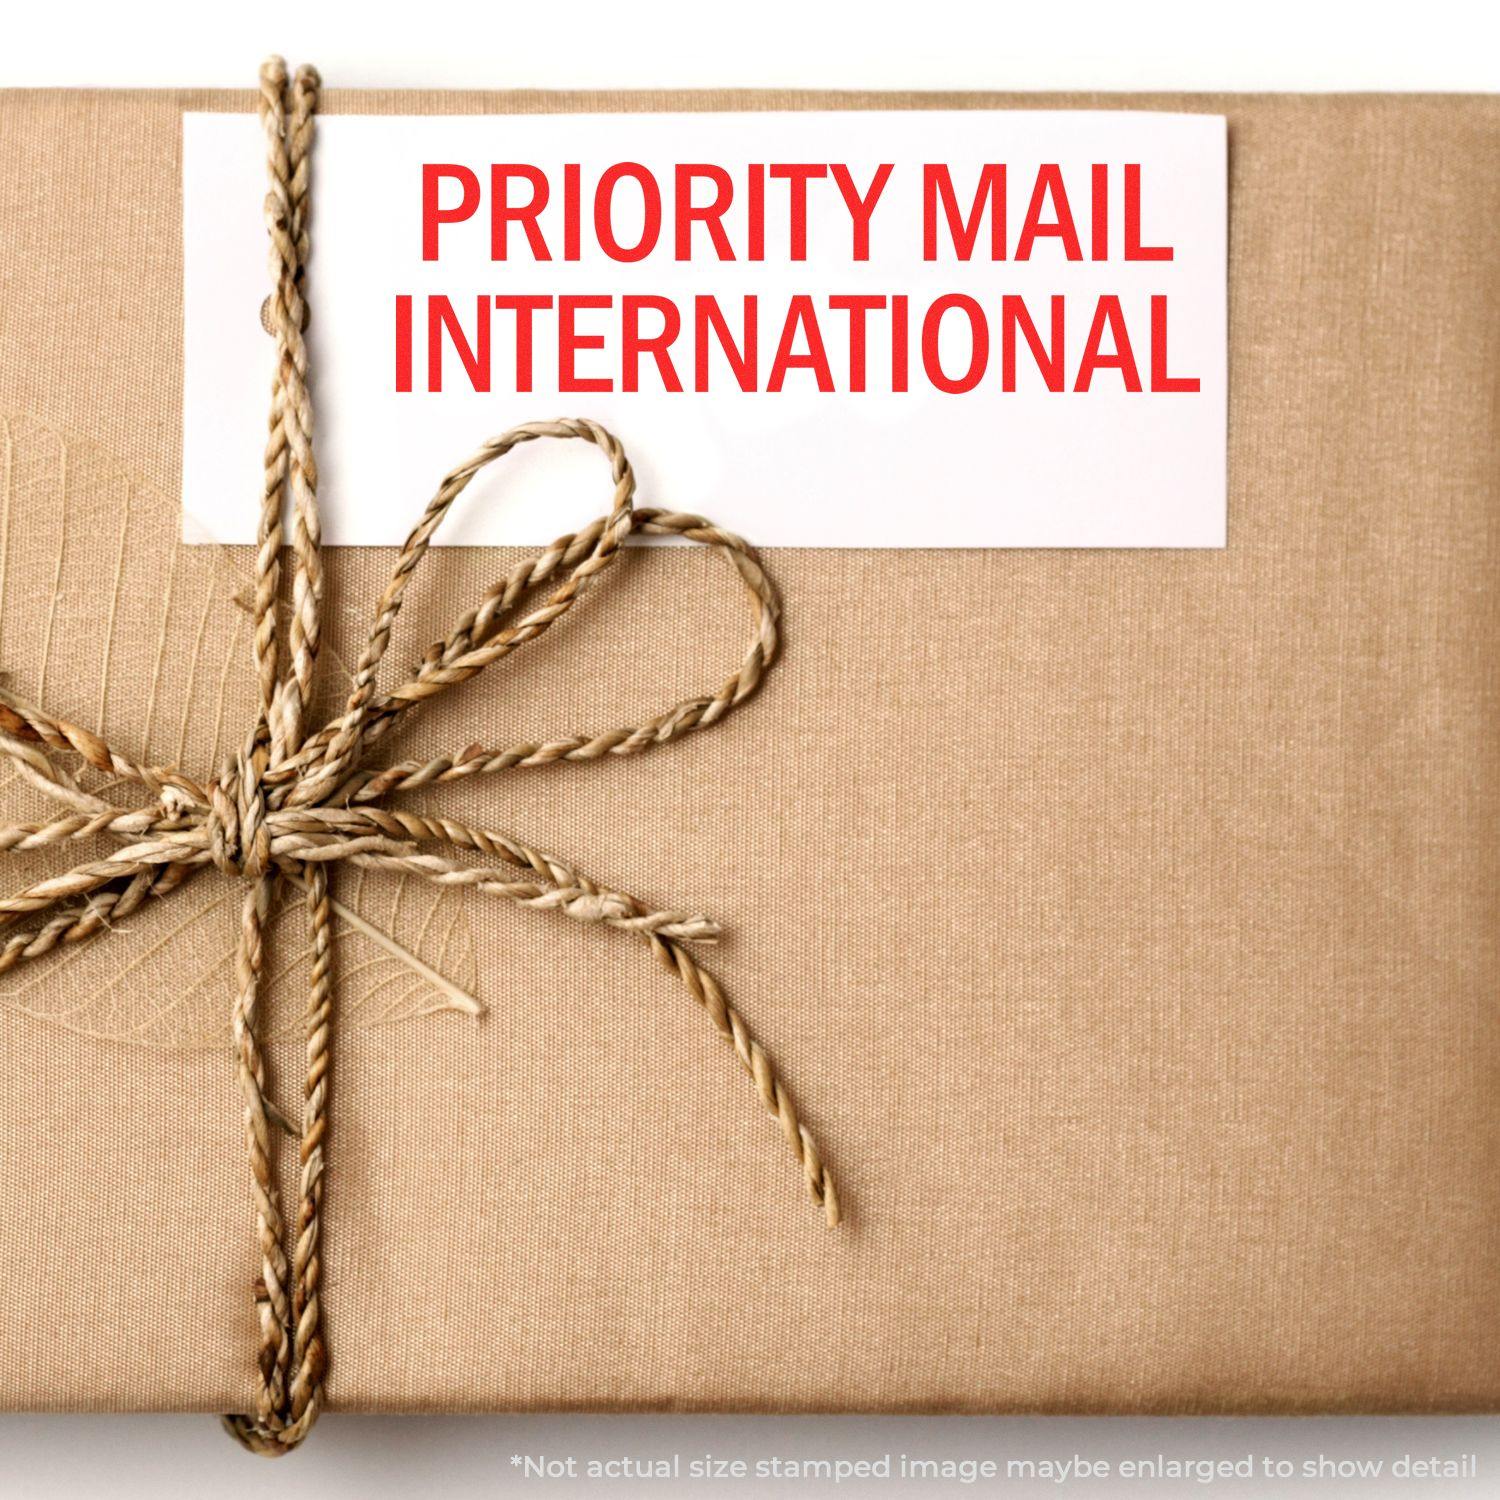 A stock office rubber stamp with a stamped image showing how the text "PRIORITY MAIL INTERNATIONAL" is displayed after stamping.